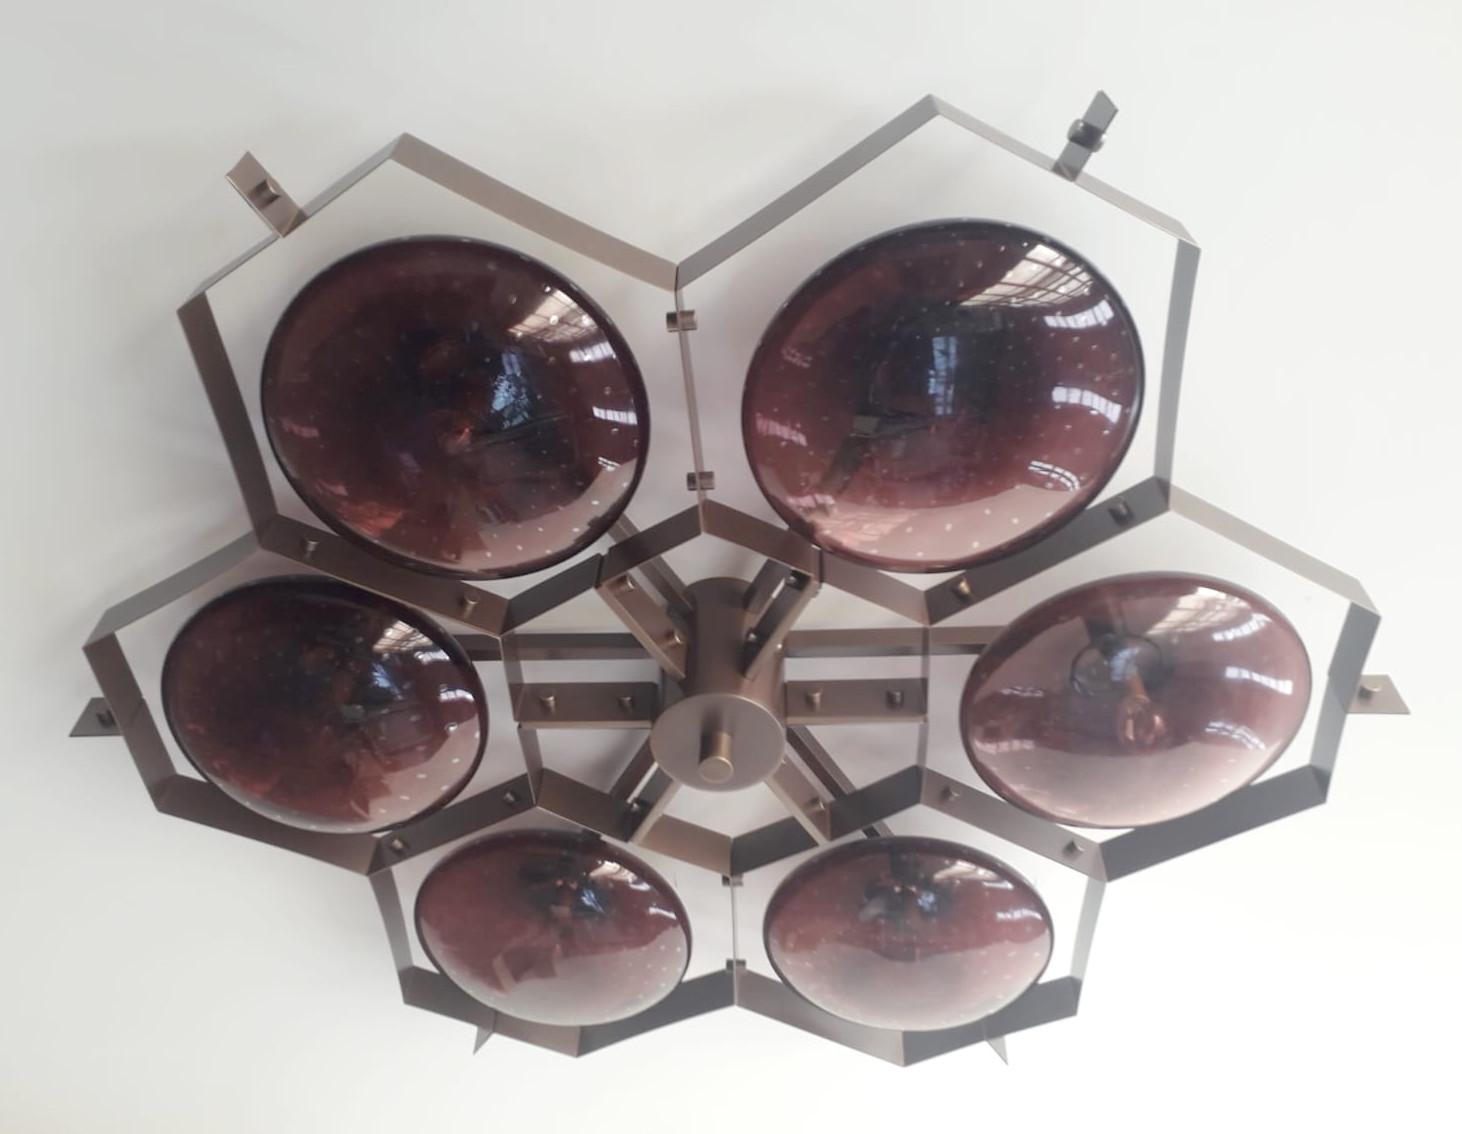 Italian flush mount with Murano glass shades mounted on solid brass frame / Made in Italy
Designed by Fabio Ltd, inspired by Angelo Lelli and Arredoluce styles
6 lights / E12 or E14 / max 40W each
Measures: Diameter 47 inches, height 10 inches
Order